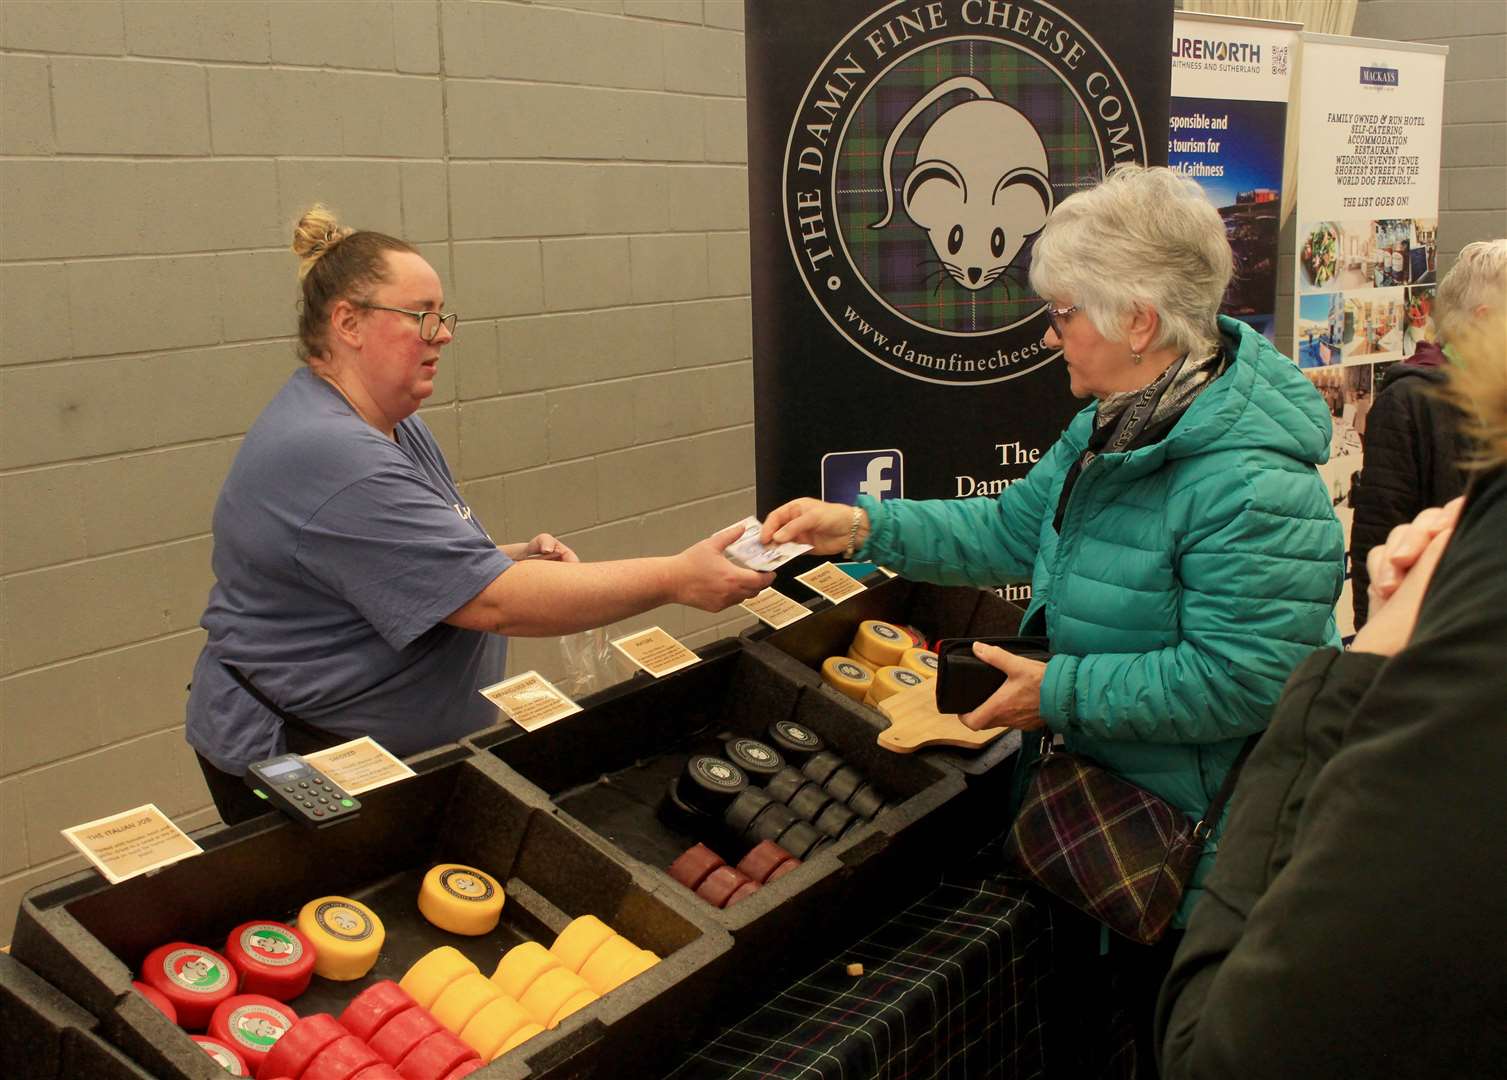 The Damn Fine Cheese Company, one of many food and drink exhibitors doing brisk business. Picture: Alan Hendry